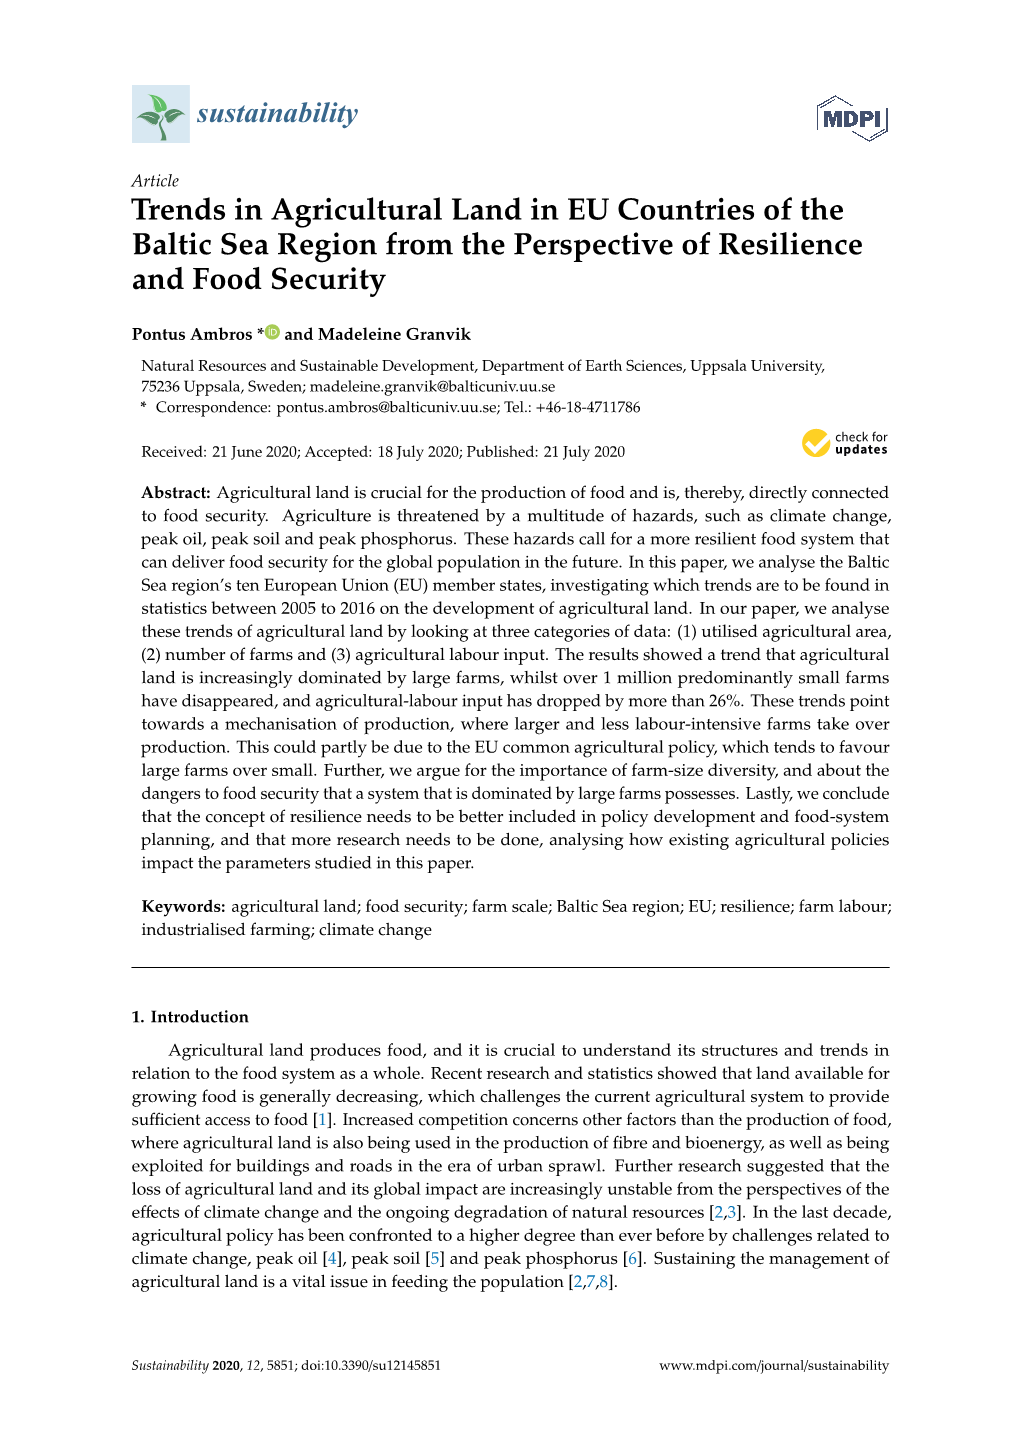 Trends in Agricultural Land in EU Countries of the Baltic Sea Region from the Perspective of Resilience and Food Security